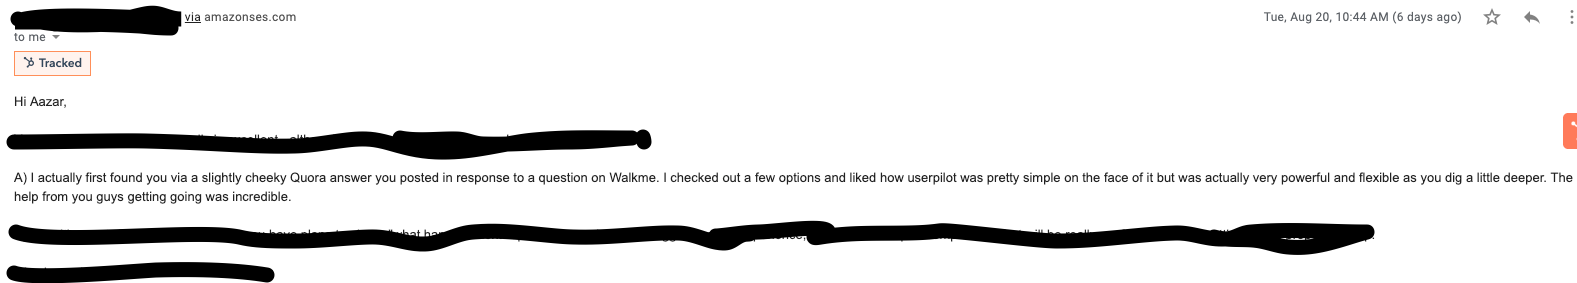 customer's email